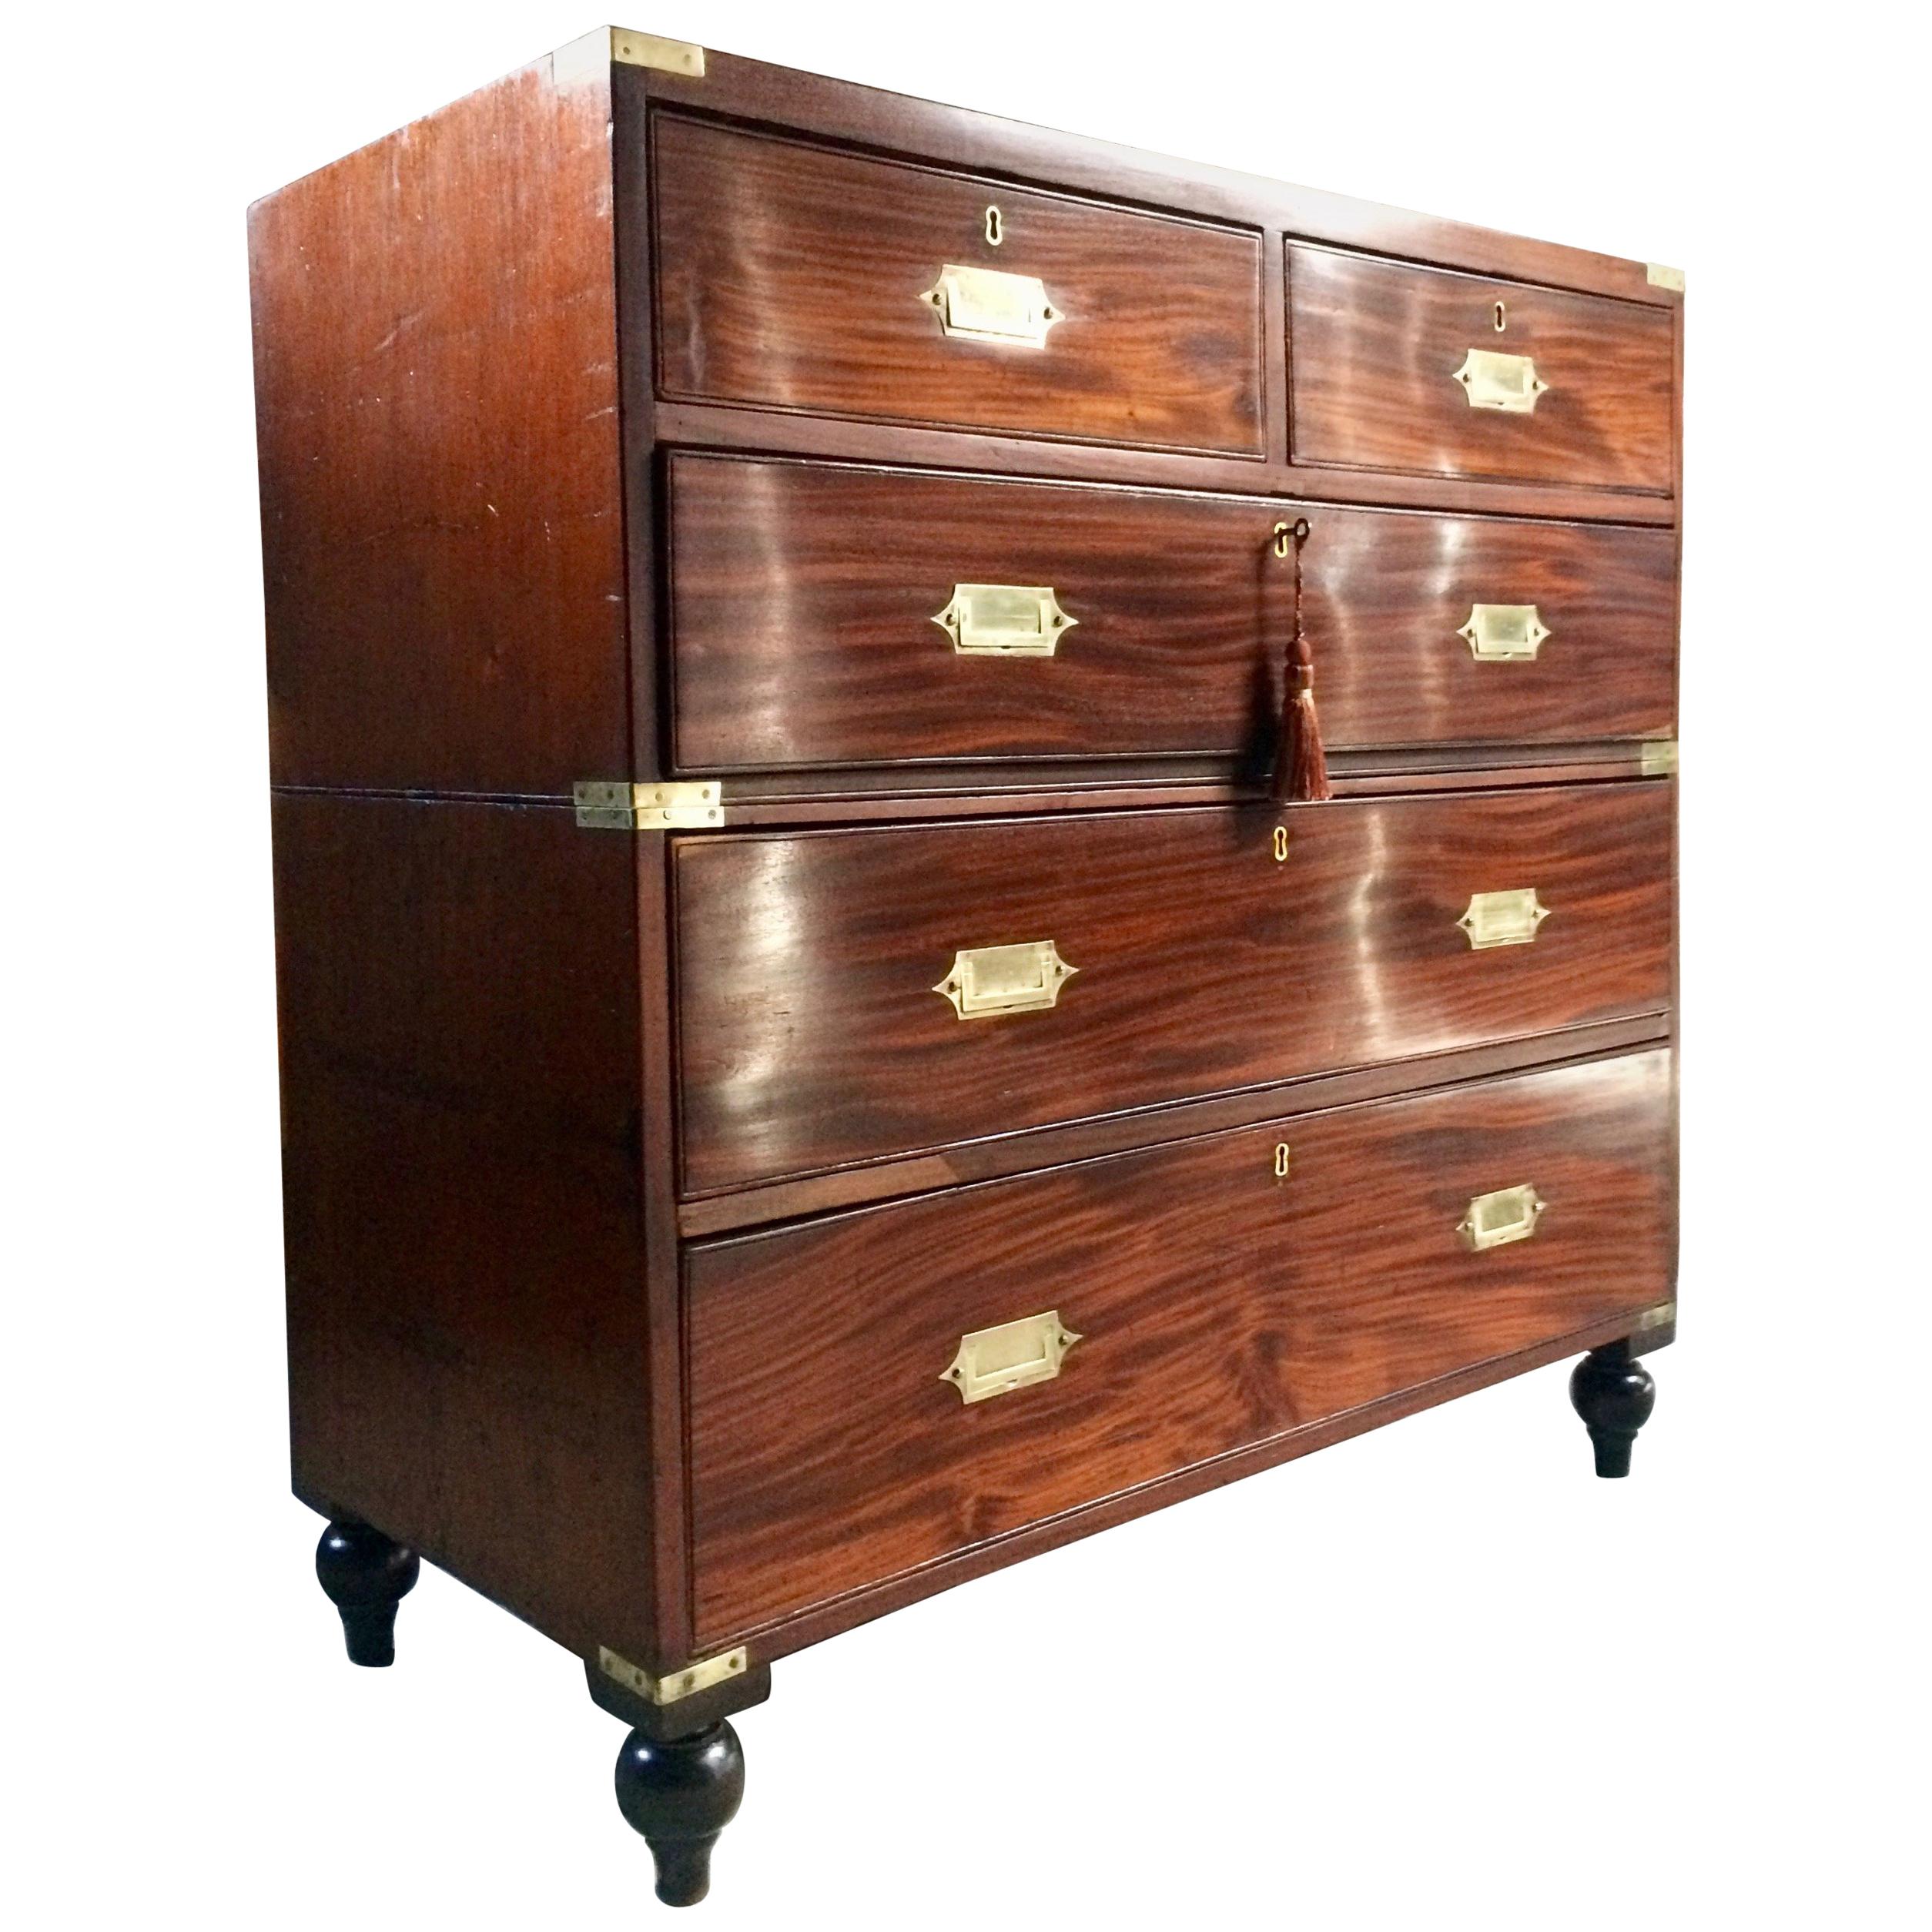 Magnificent Antique Military Campaign Chest of Drawers Mahogany Victorian No.6